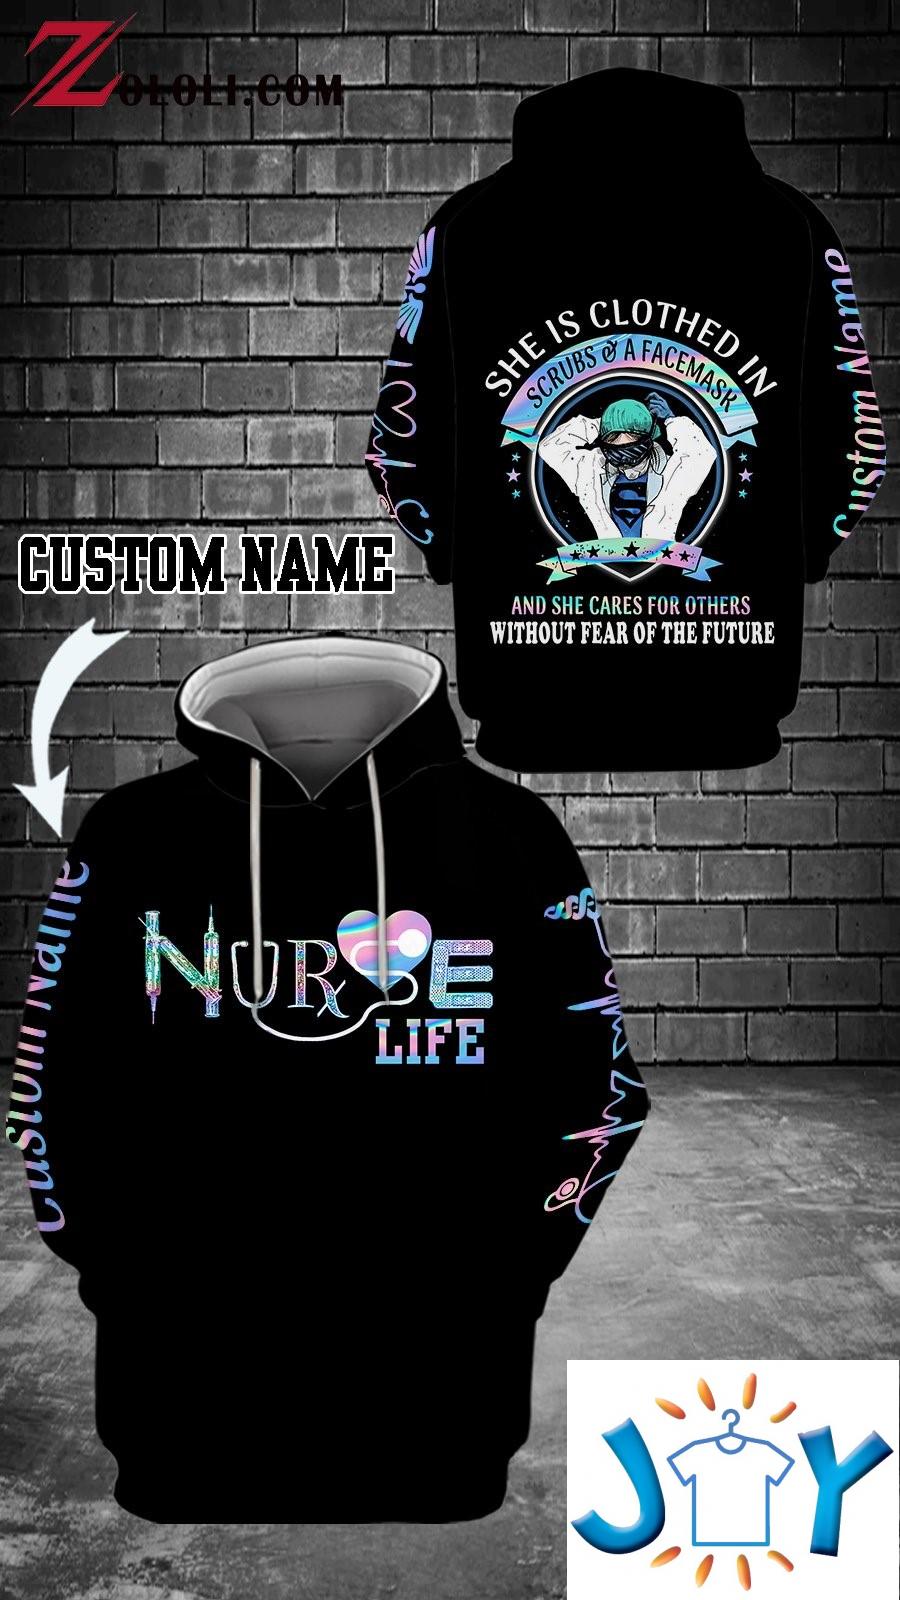 Personalized Nurse Life She Is Clothed In Scrubs And A Face Mask 3D Hoodies